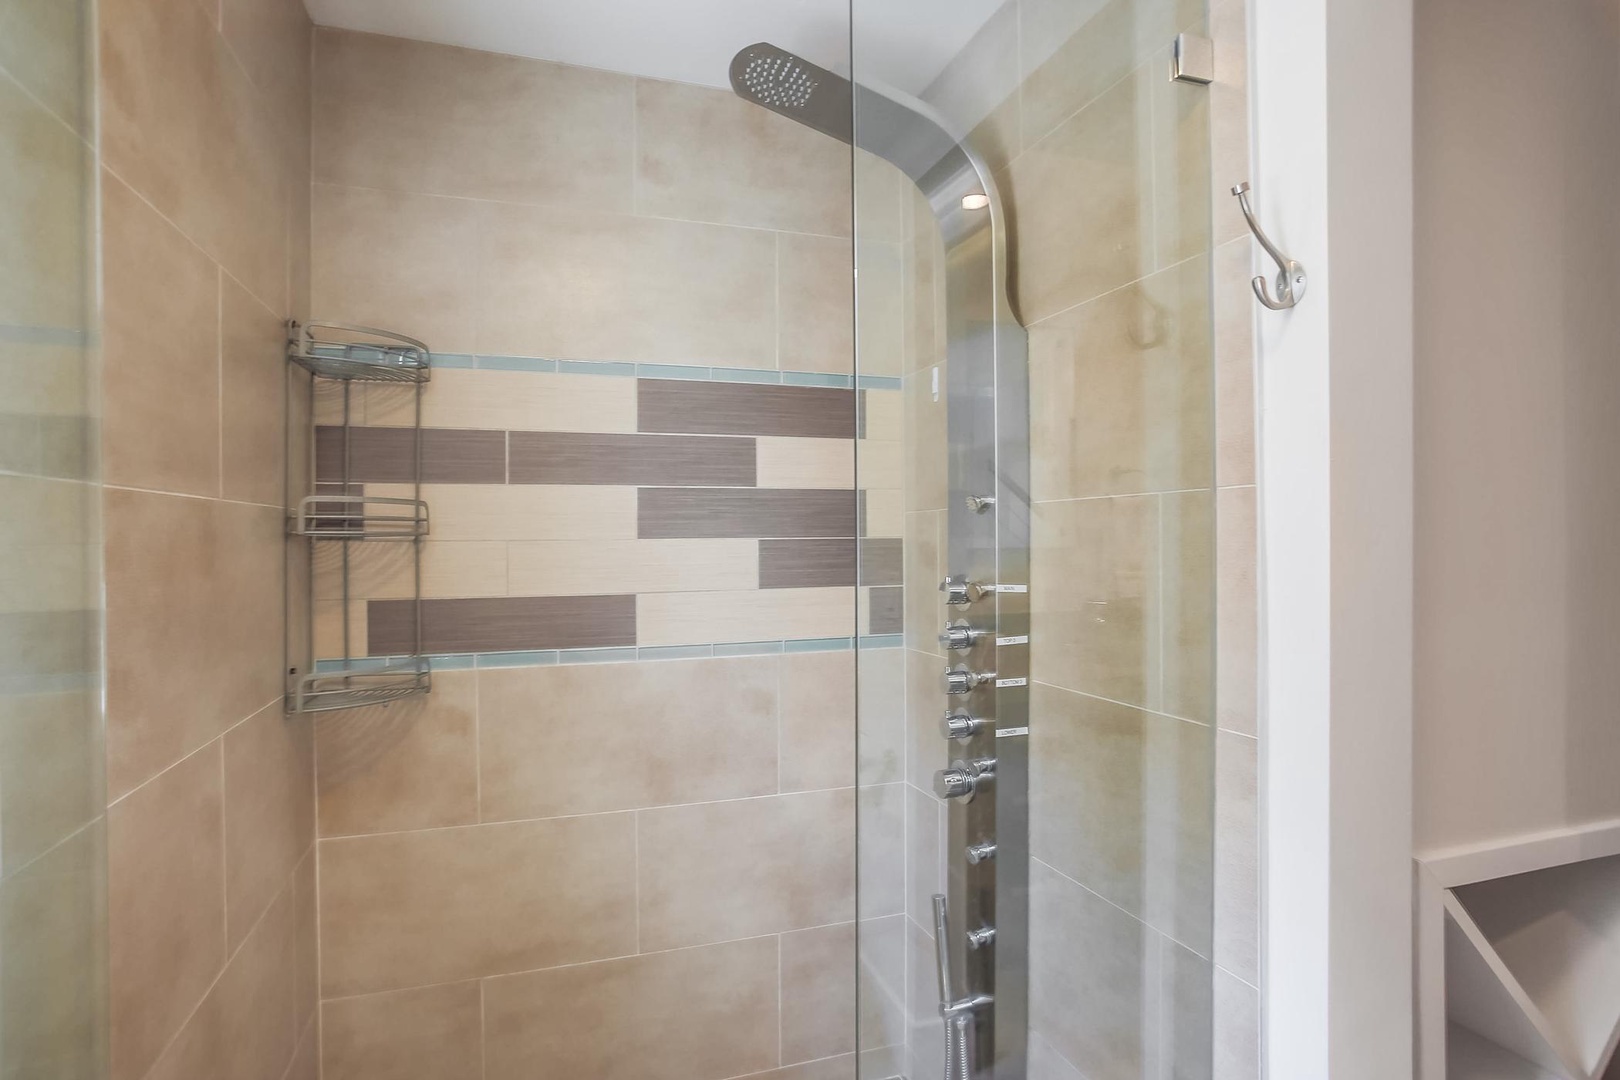 Second level bath with walk-in shower